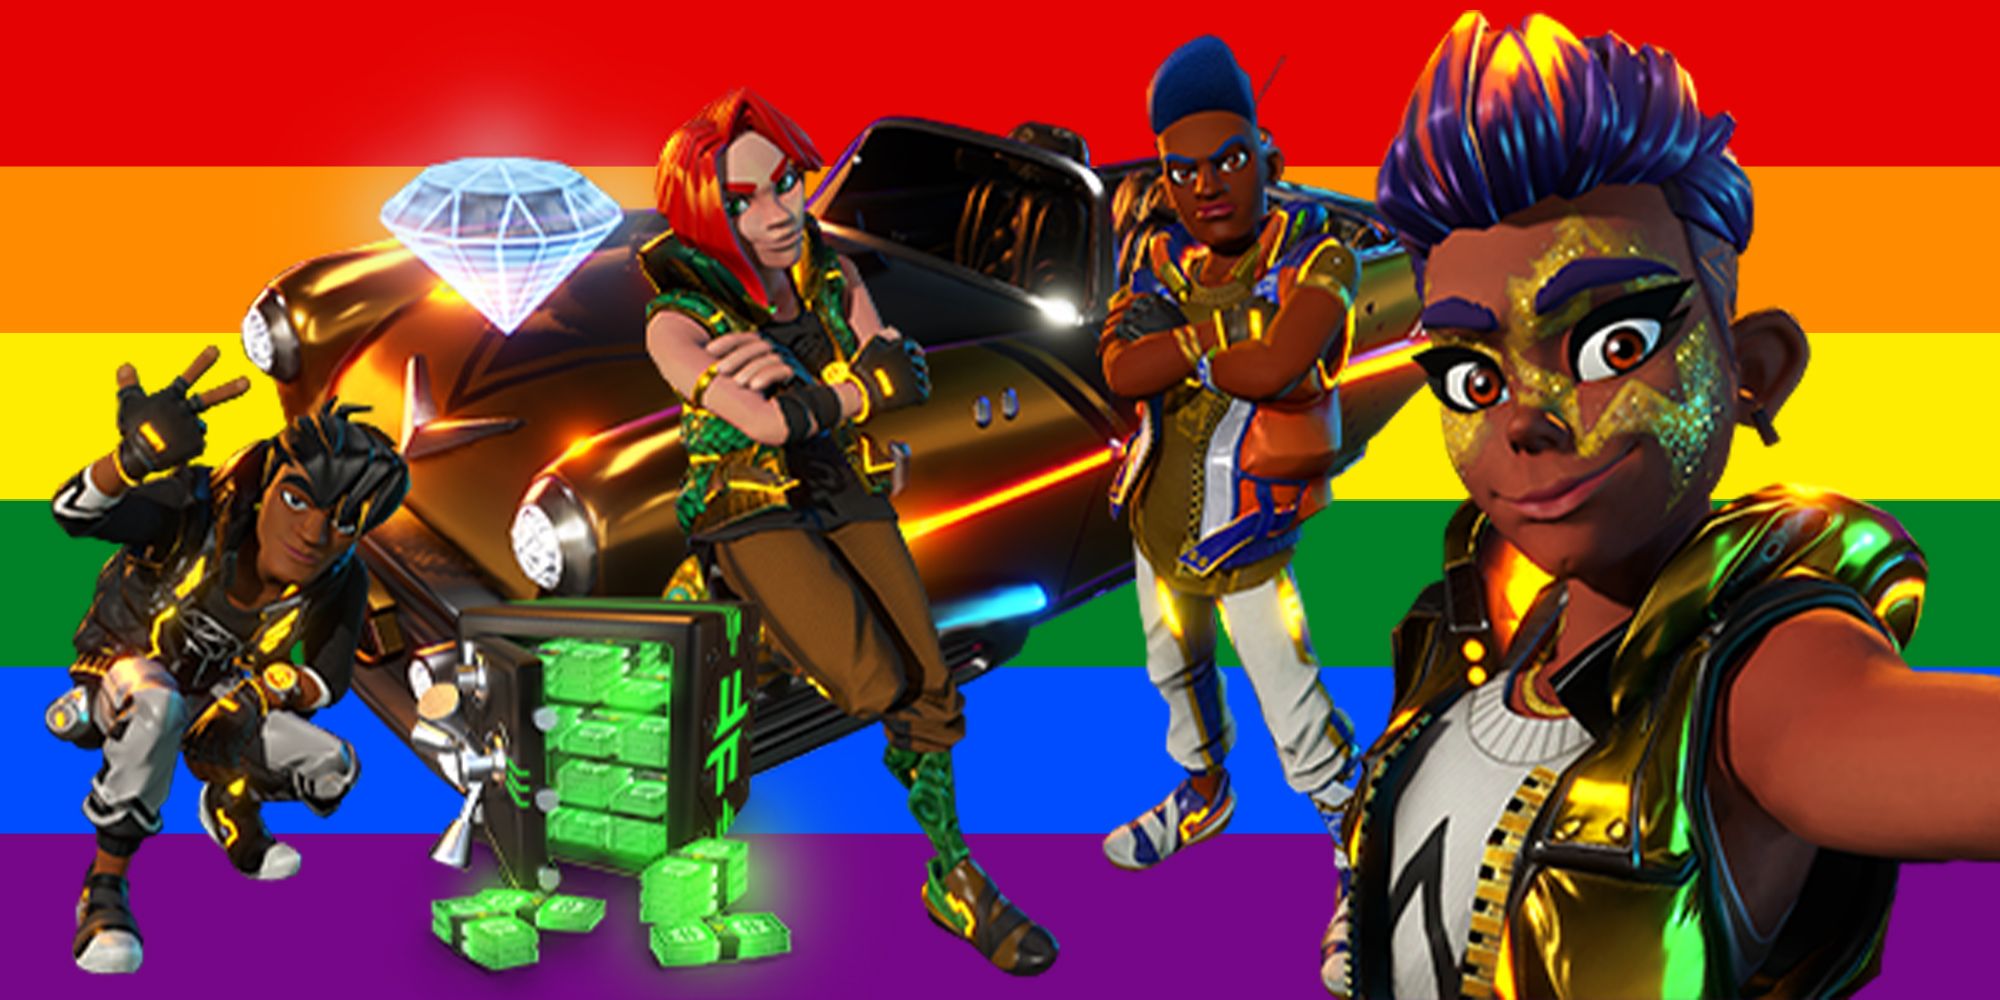 Interview: Knockout City Developers On Embracing Queerness